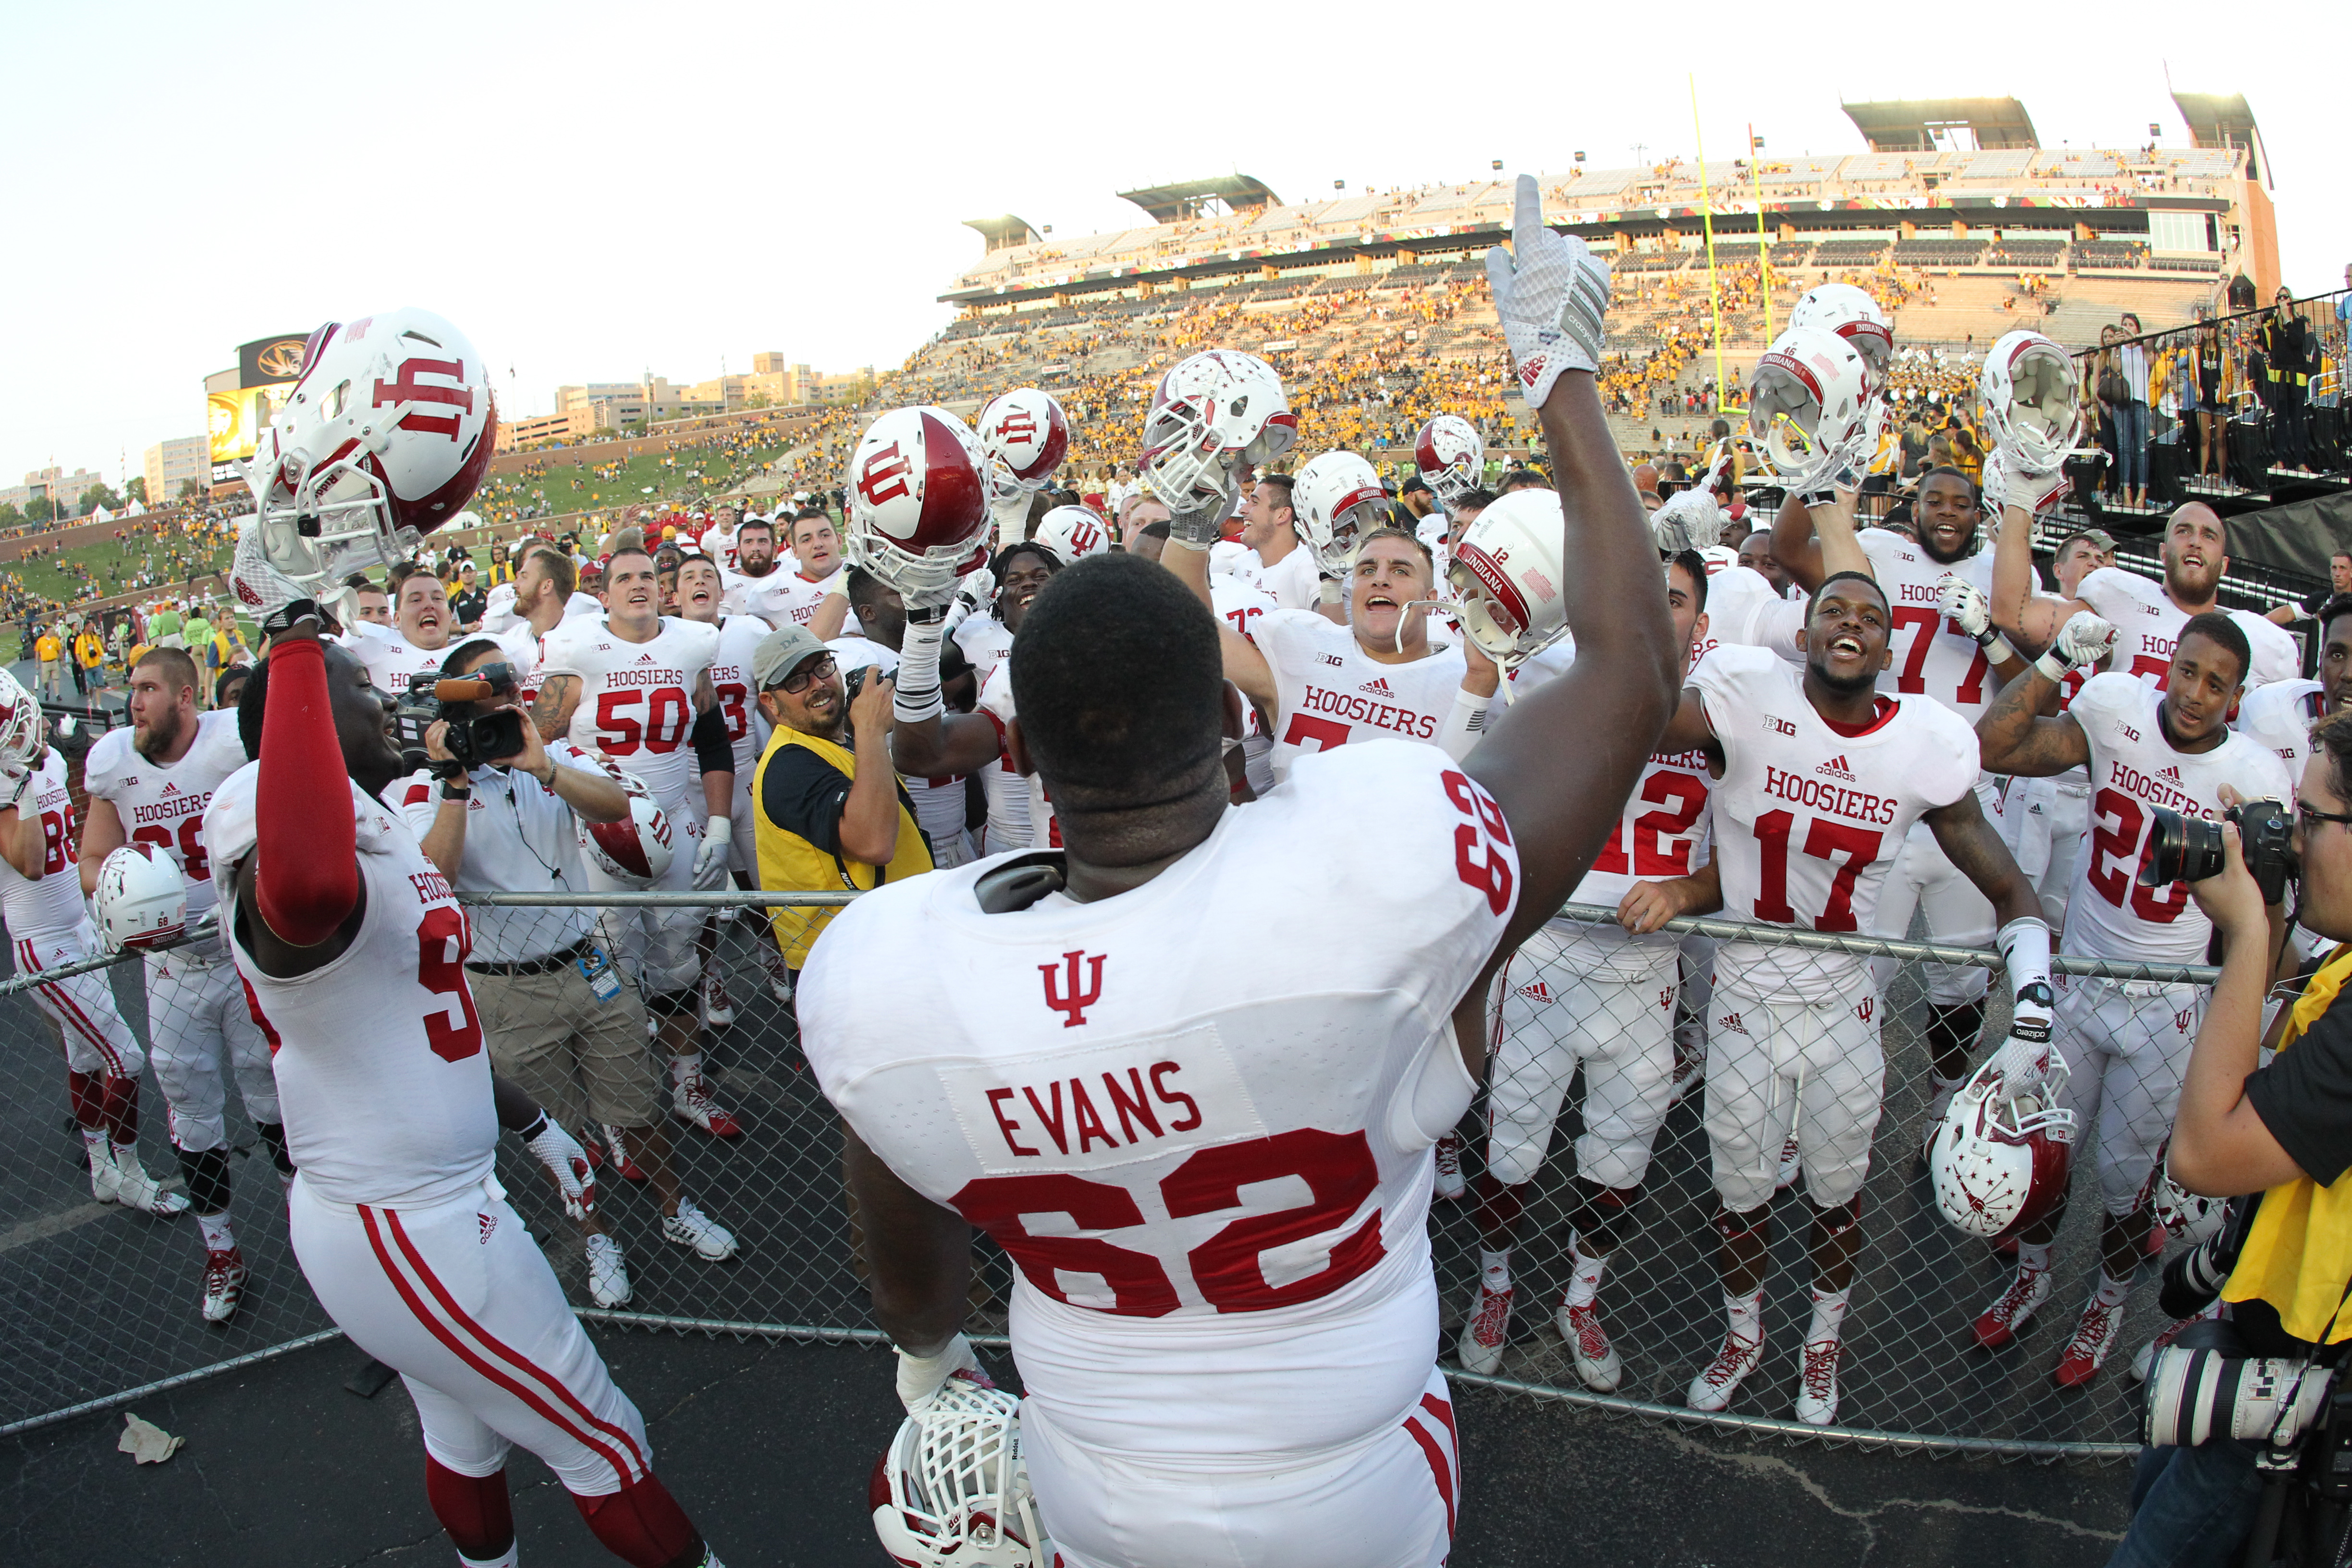 The biggest Indiana upset in recent memory, and arguably one of the biggest in school history, defeating #18 Missouri.